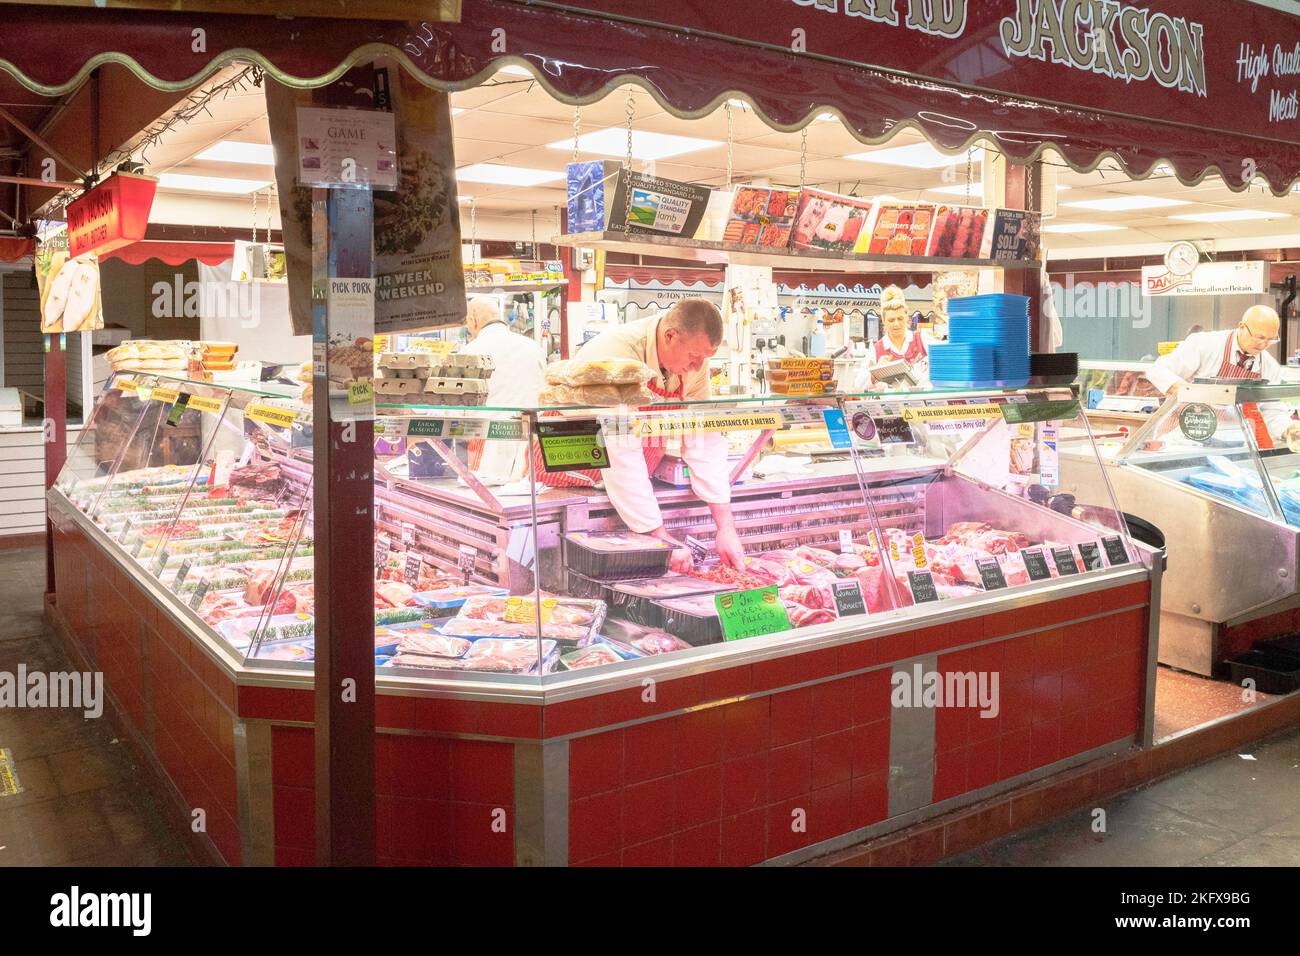 Butcher tidying the display on David Jackson Butchers Ltd meat and pie stall in Darlington covered market Stock Photo